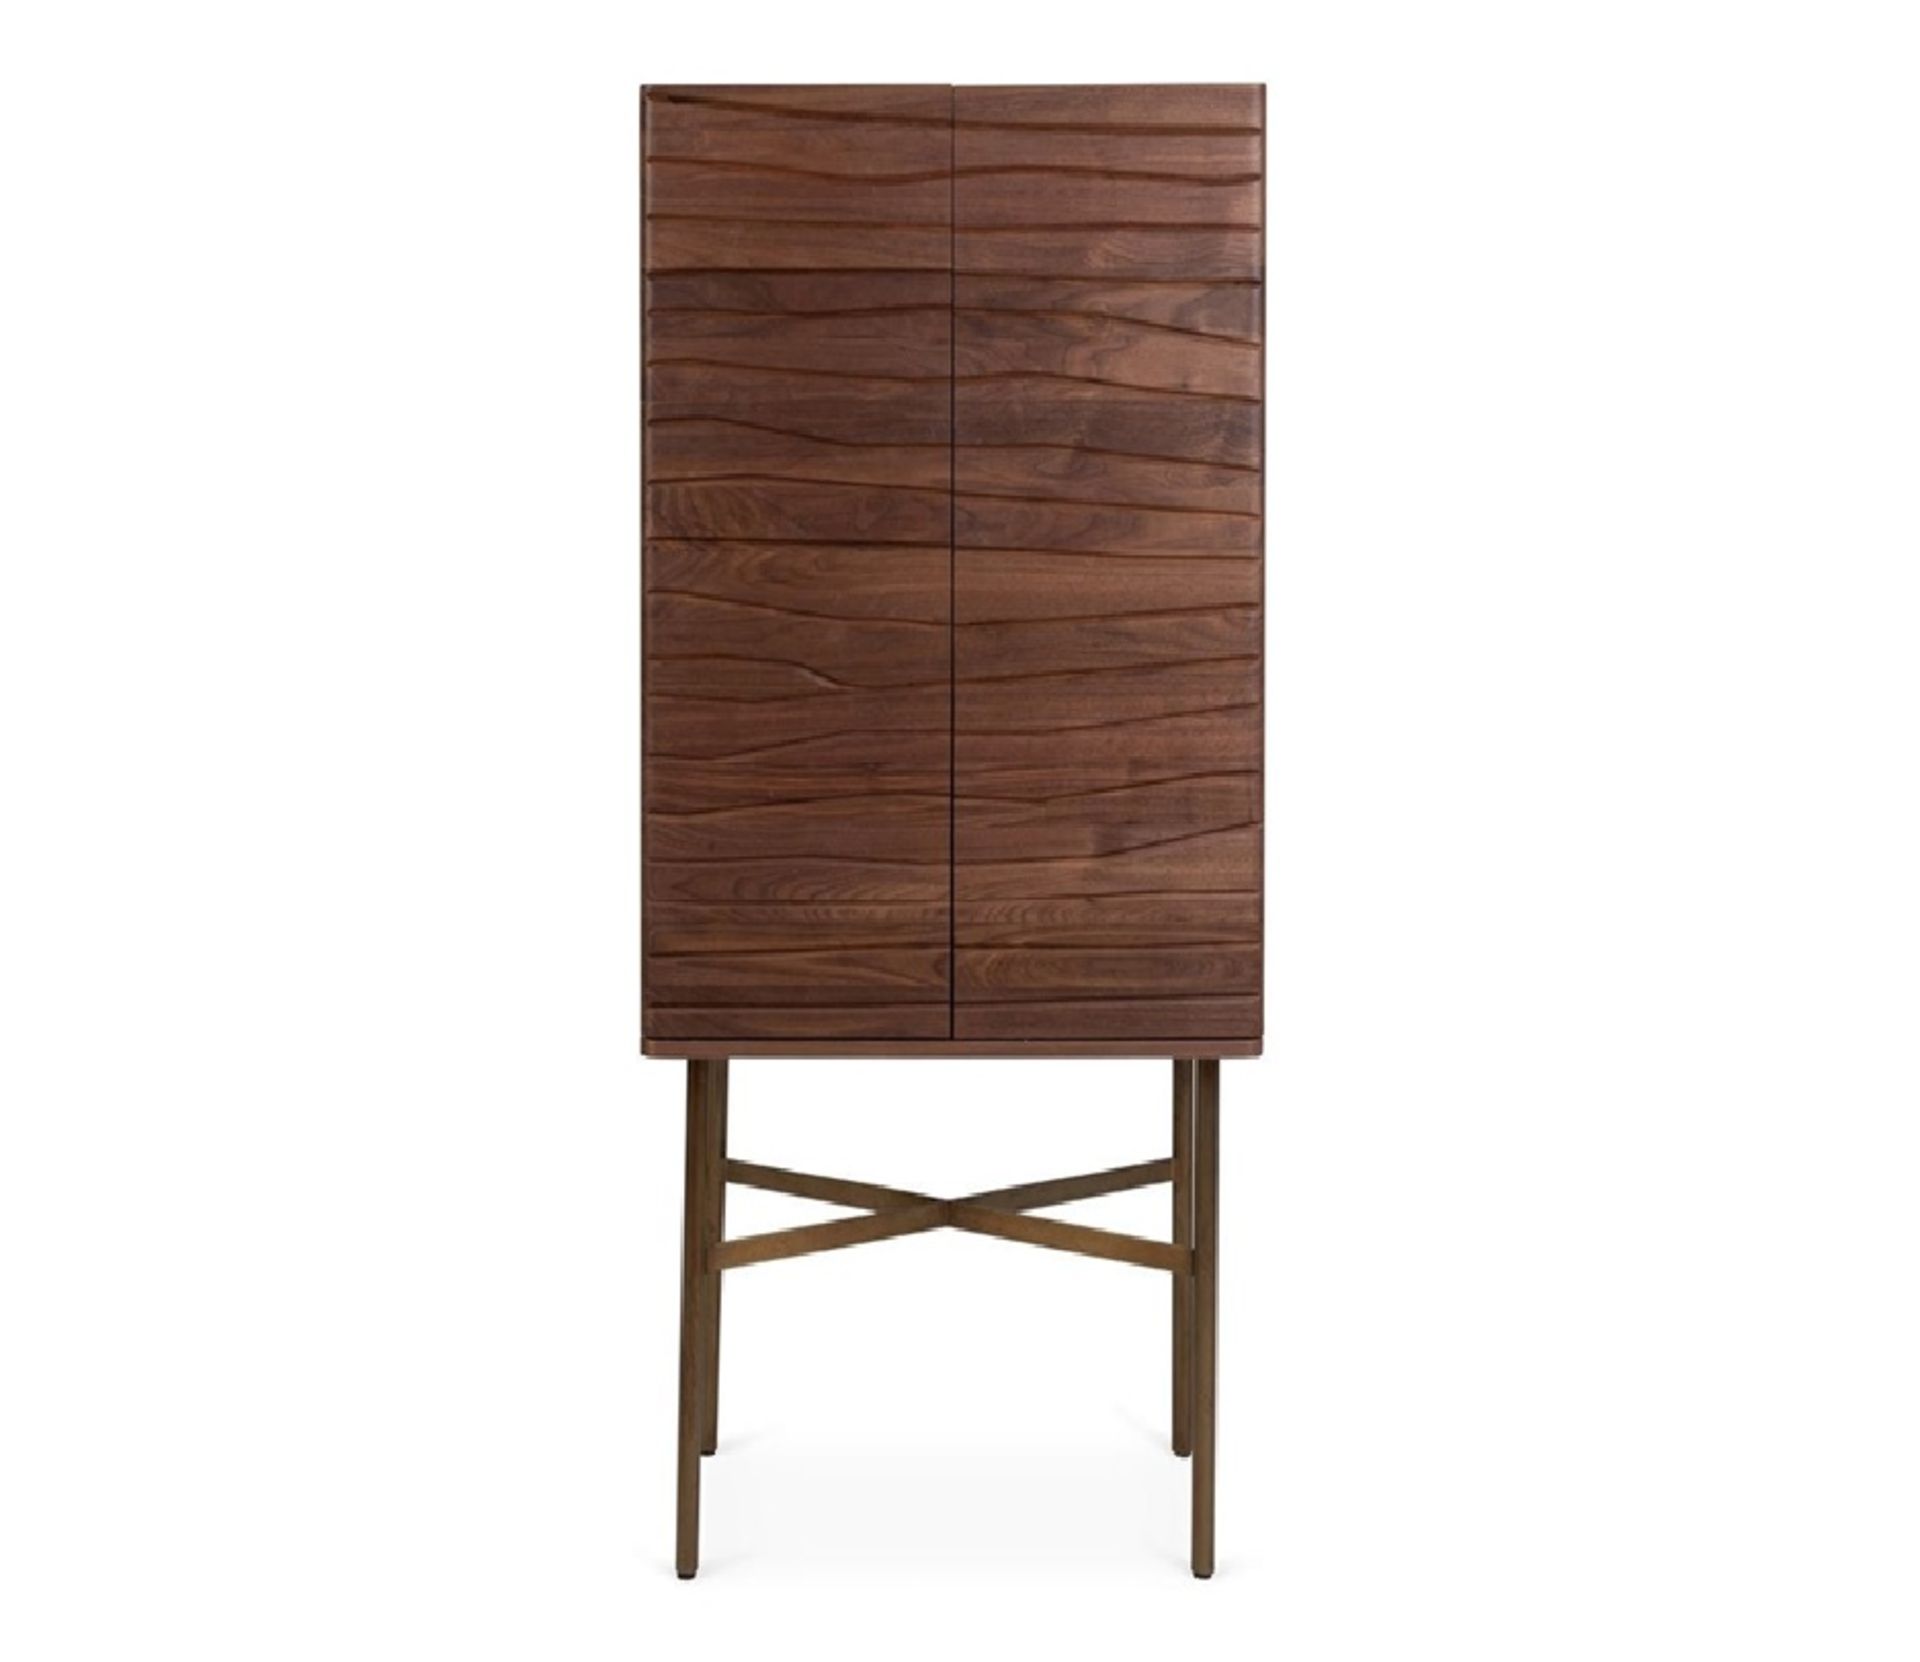 Benwest Cocktail Inspired By The Art Of Joinery, This Walnut Drinks Cabinet Is A Fusion Of - Image 2 of 10